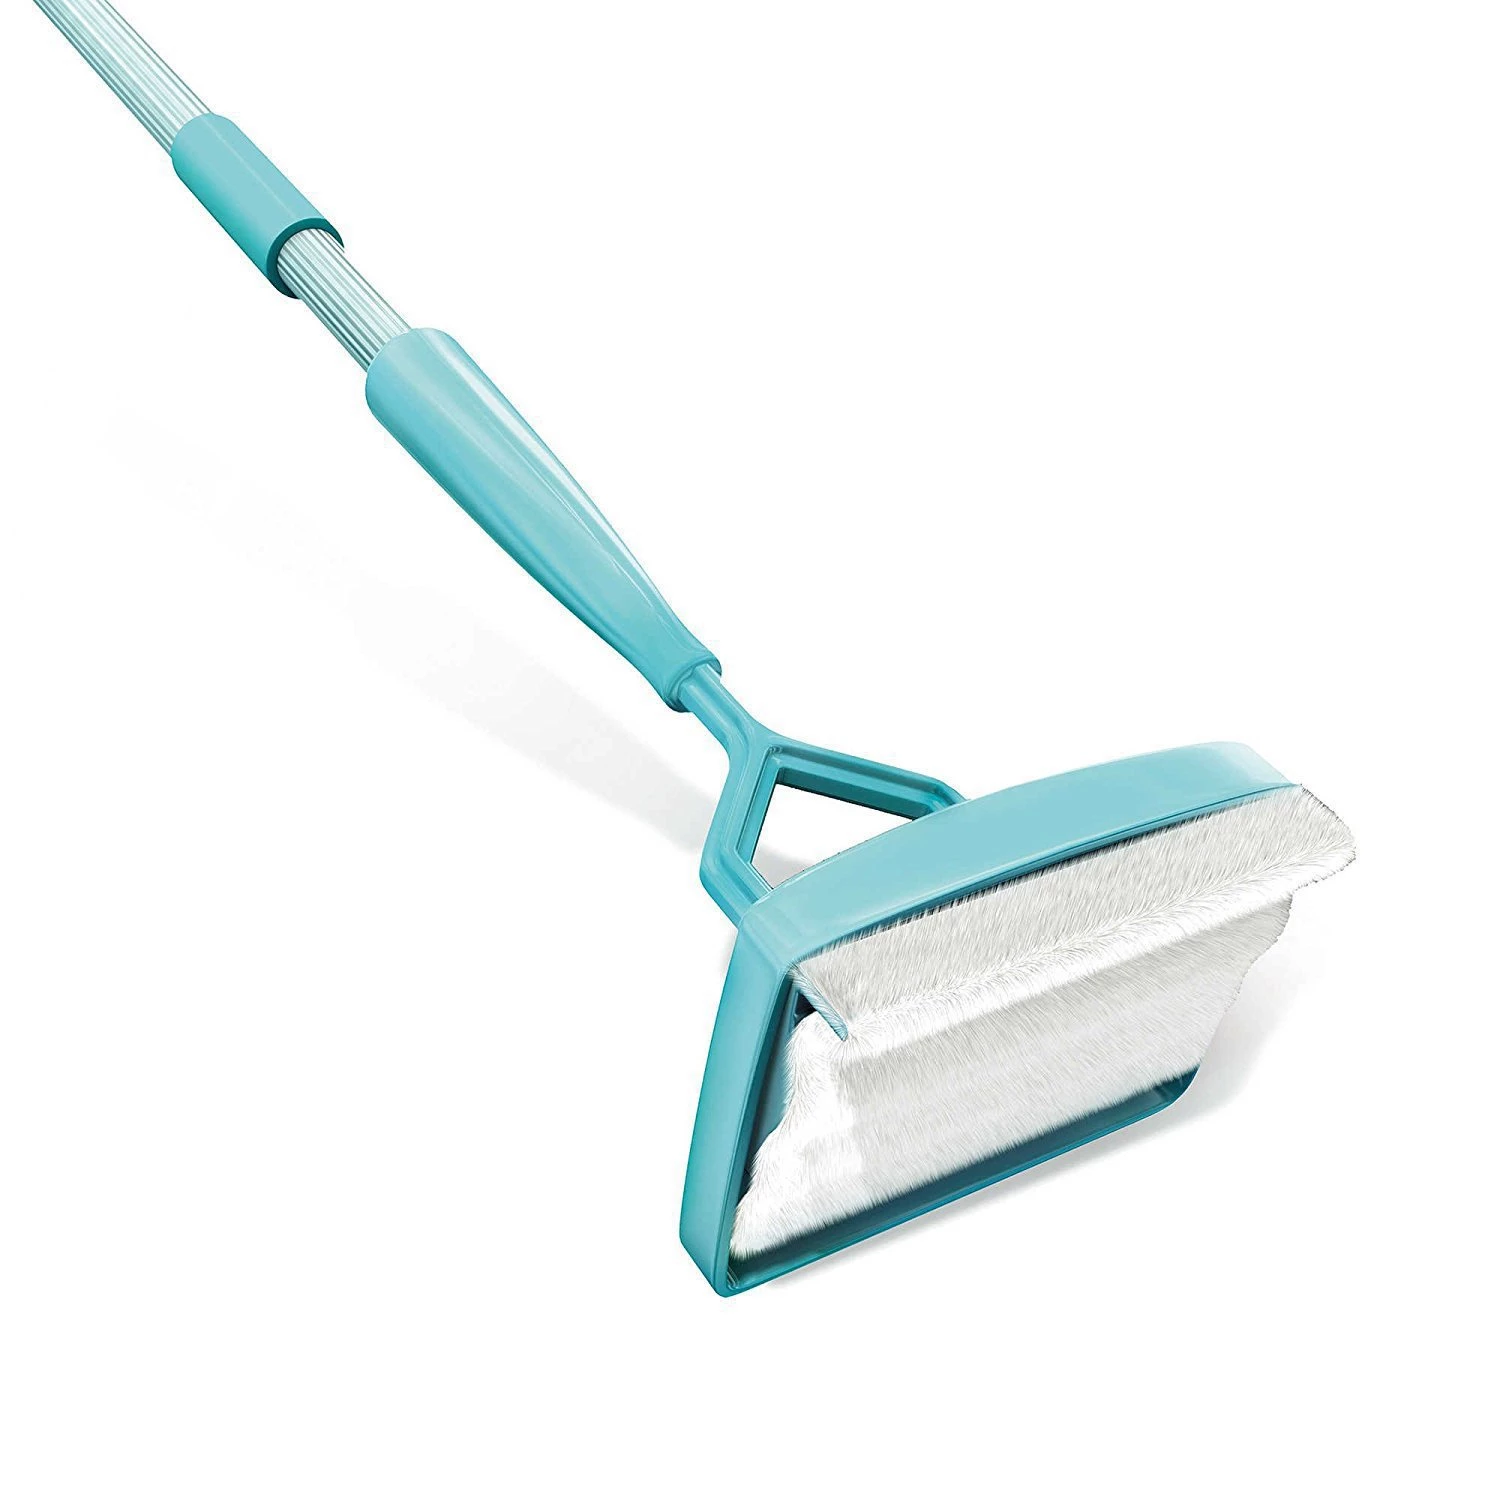 Baseboard Buddy Cleaning Tool with 3 XL Pads